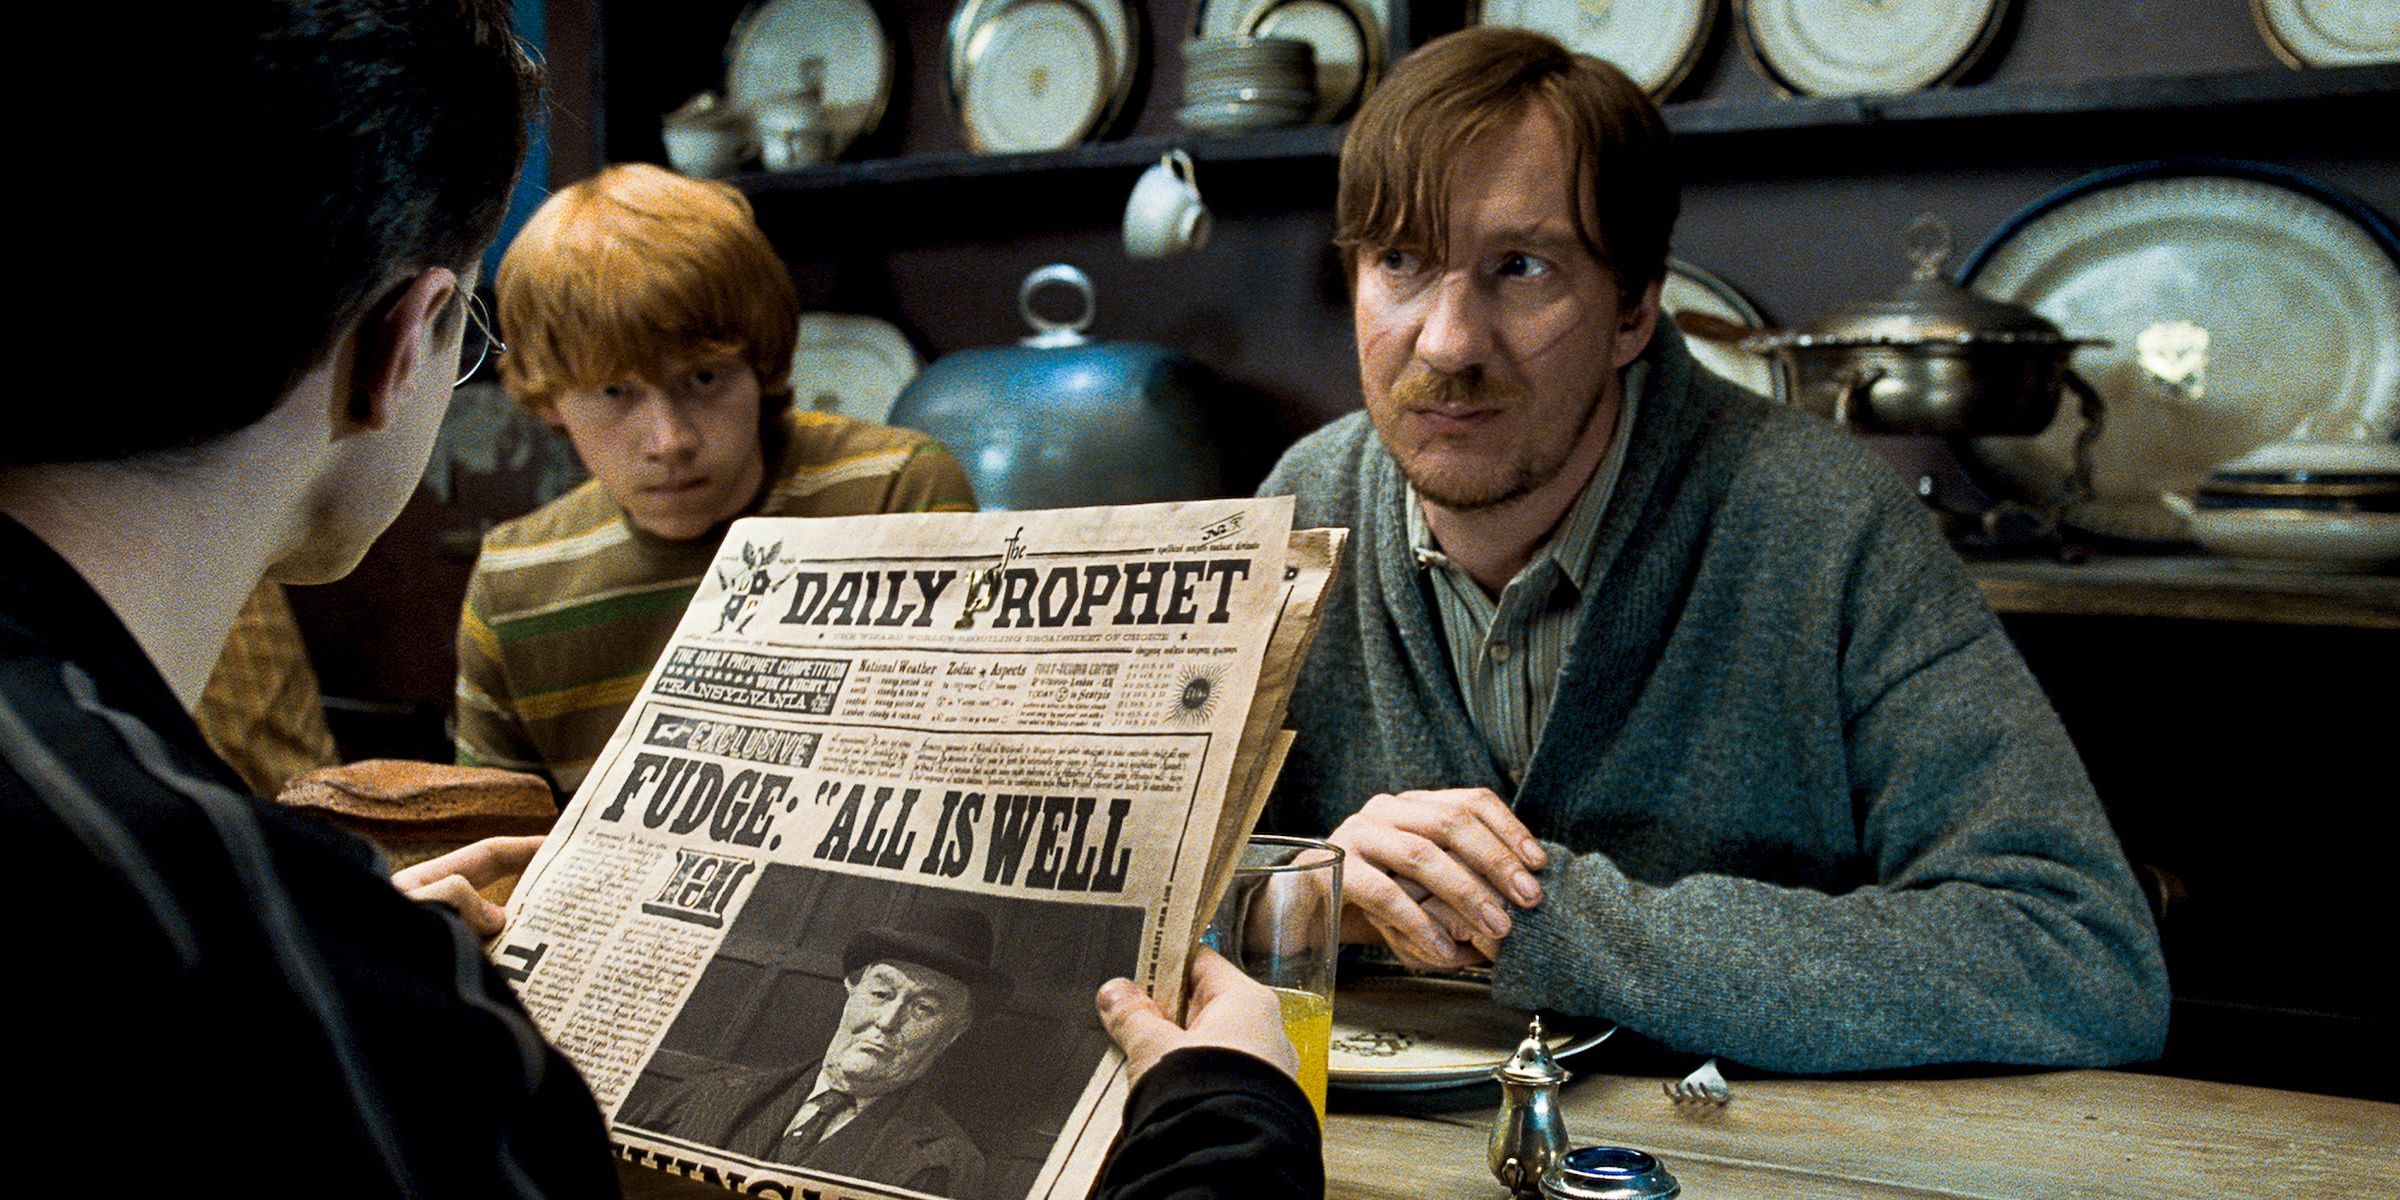 Remus, Ron, and Harry.